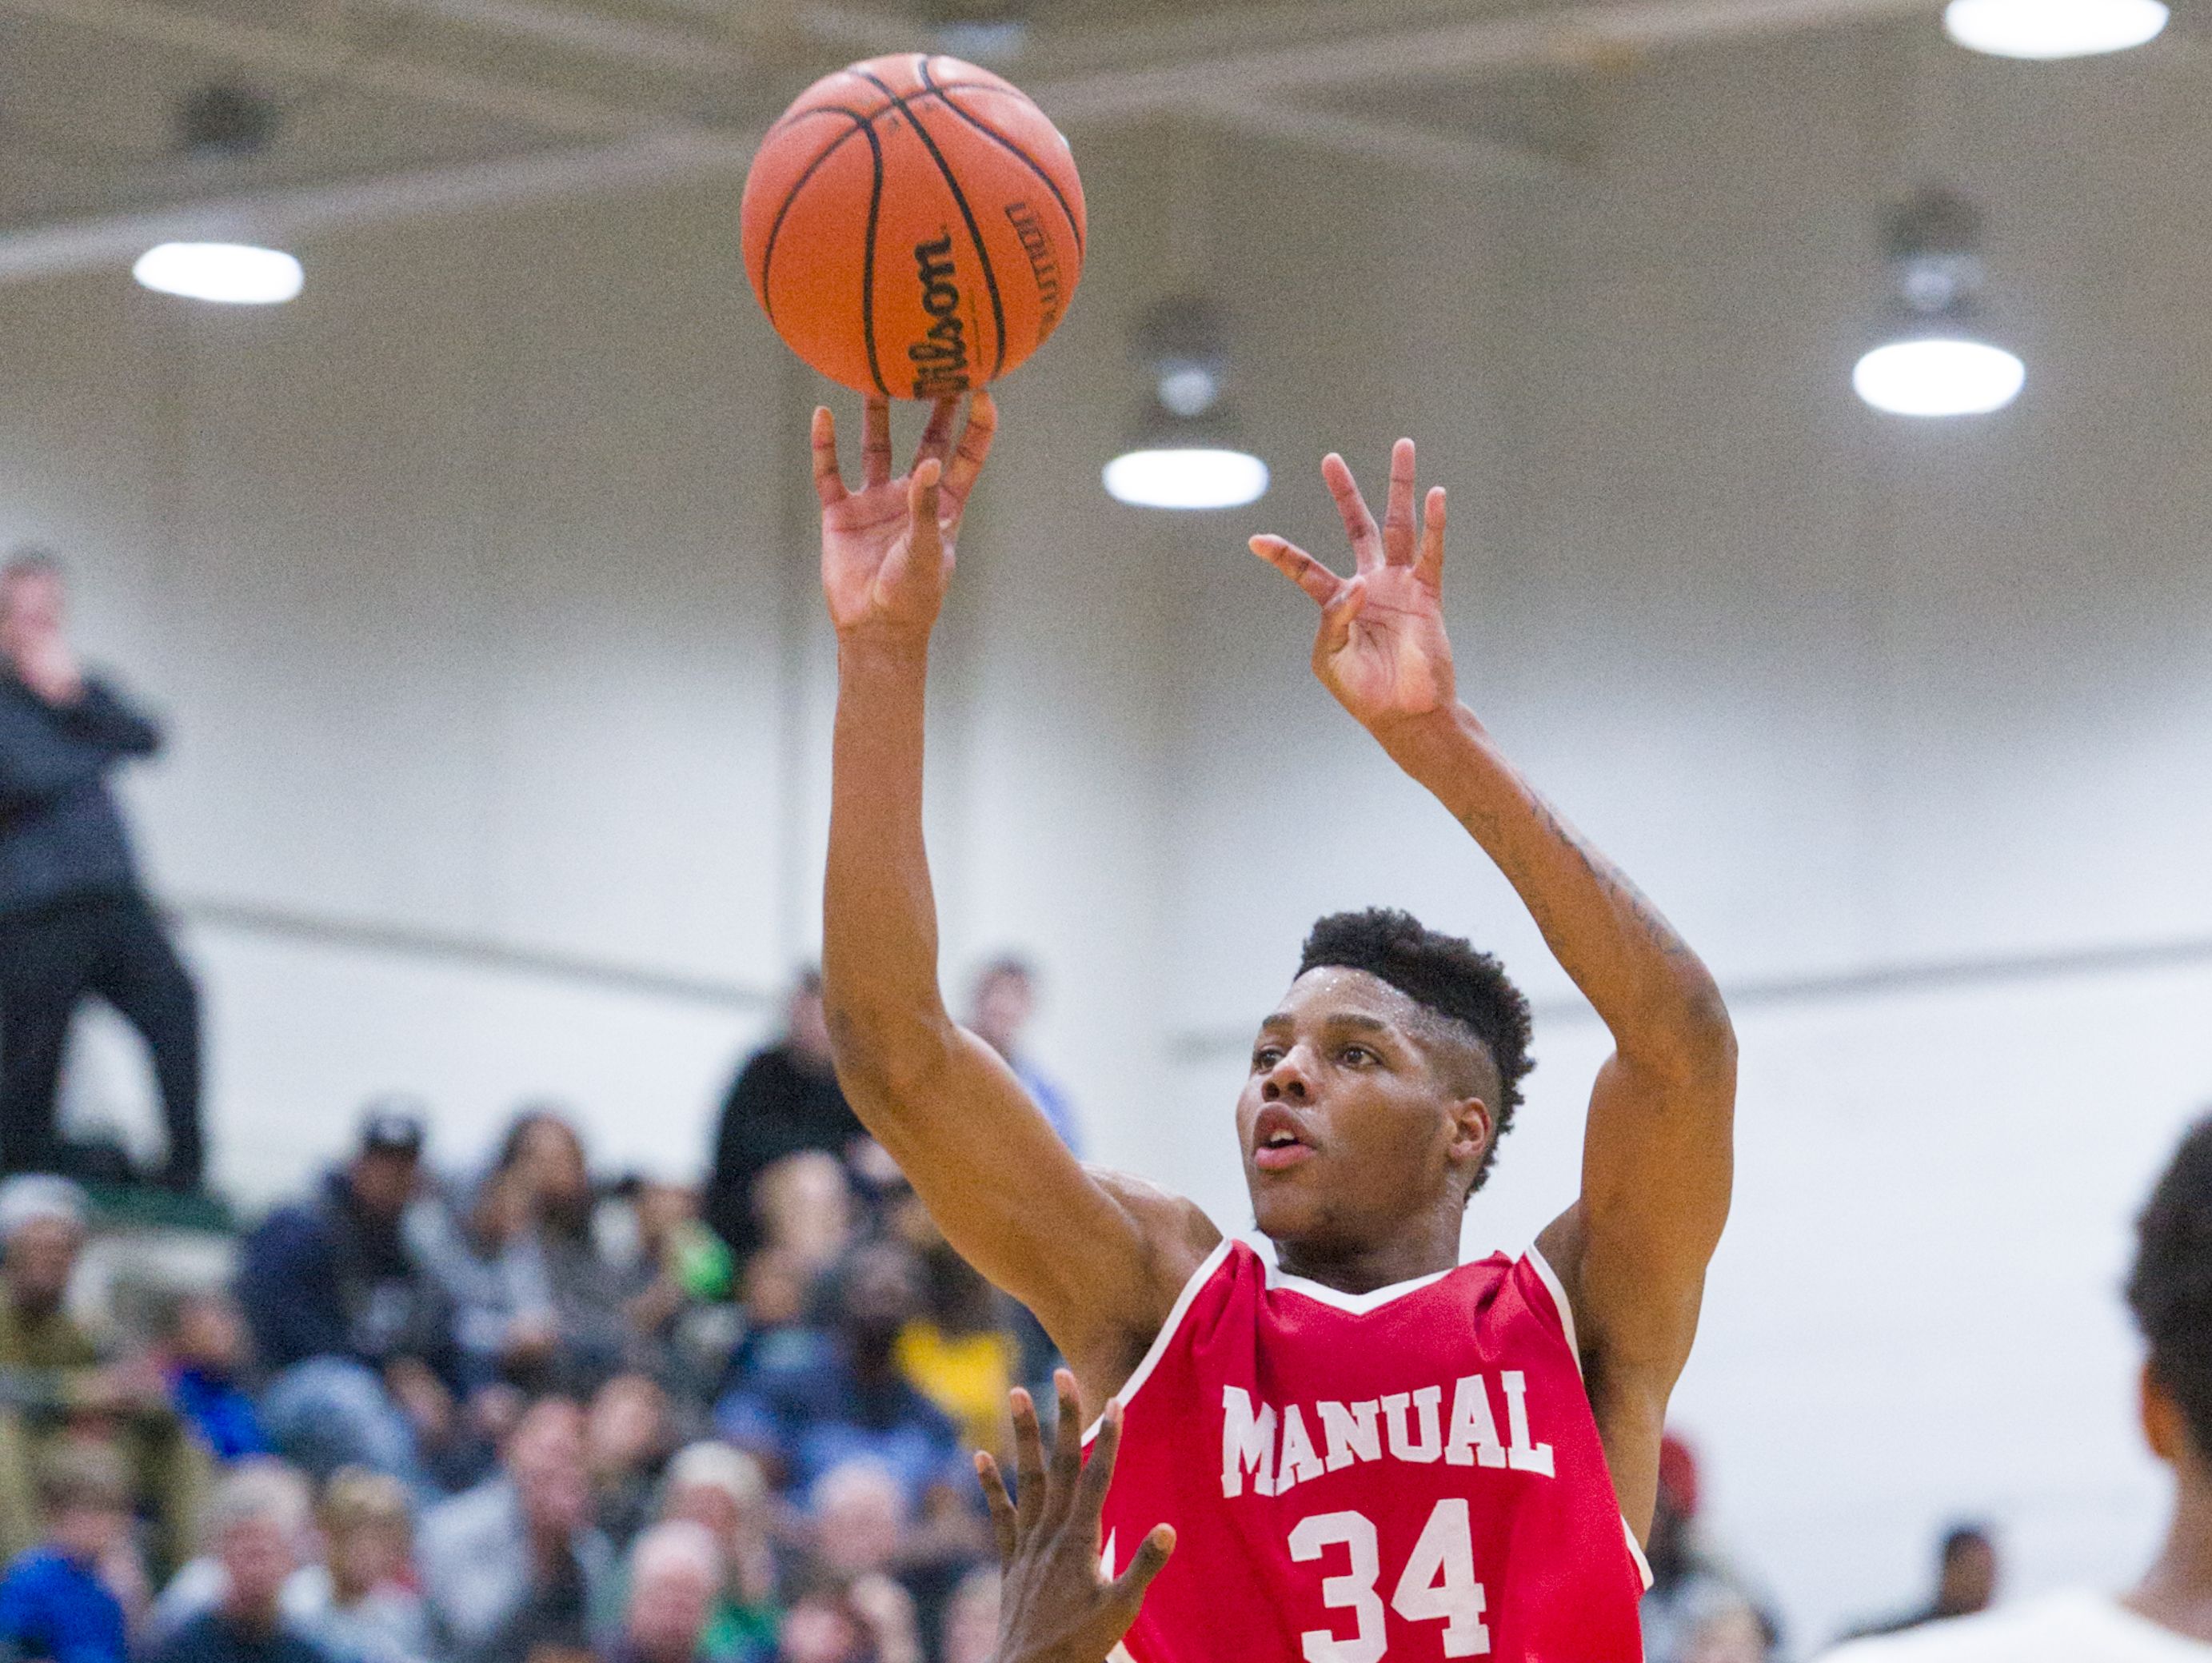 Courvoisier McCauley is averaging 30 points a game as a senior for Manual.